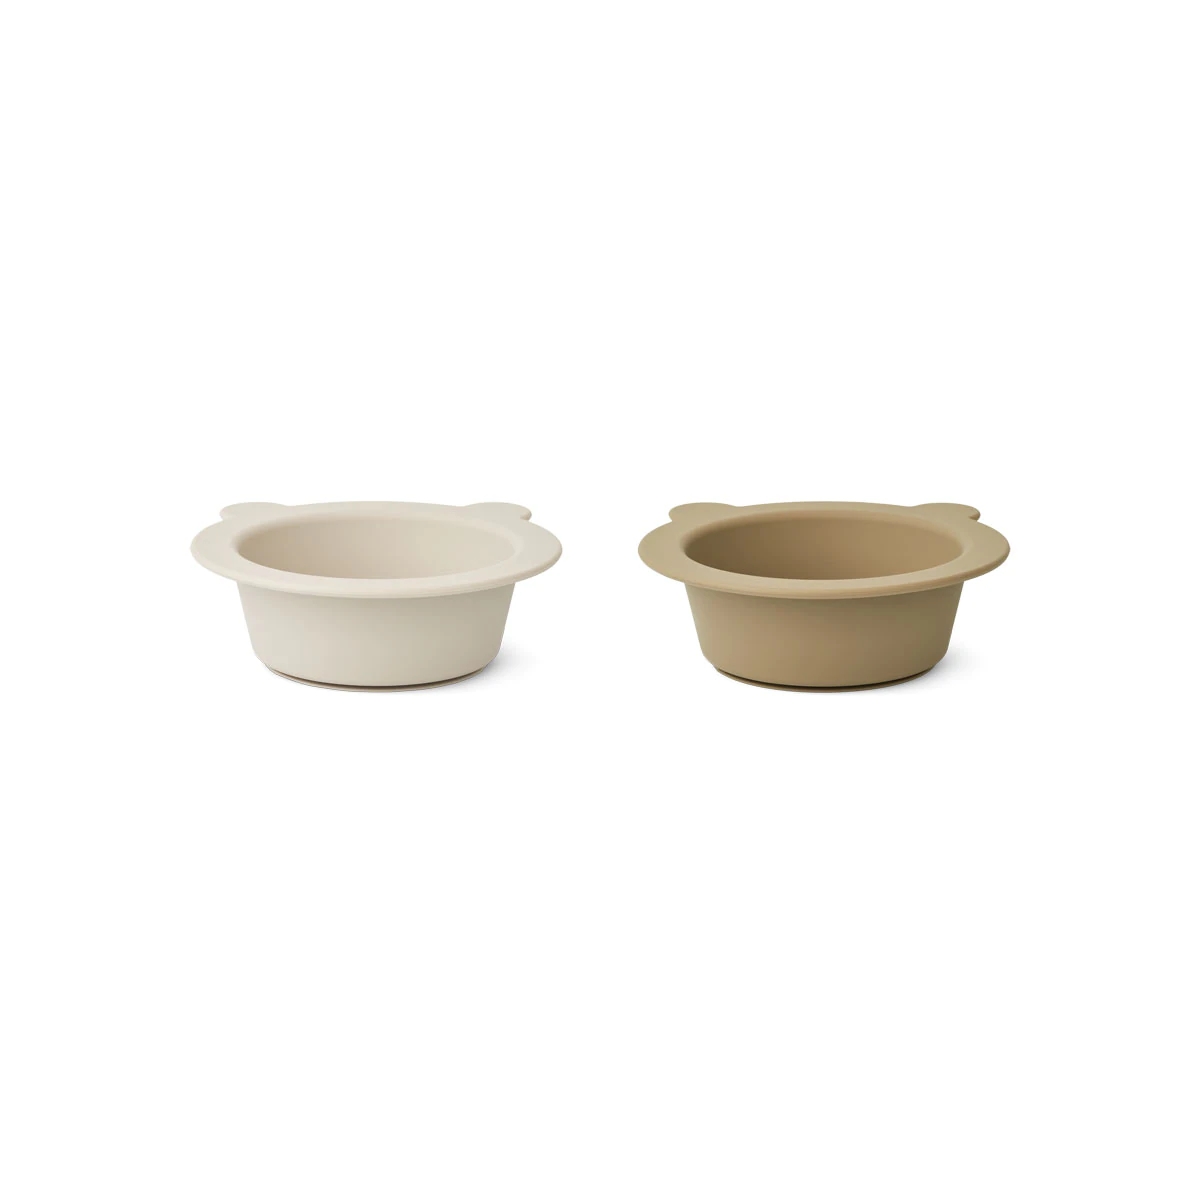 Liewood, Peony silicone suction bowl set of 2, Sandy oat mix 